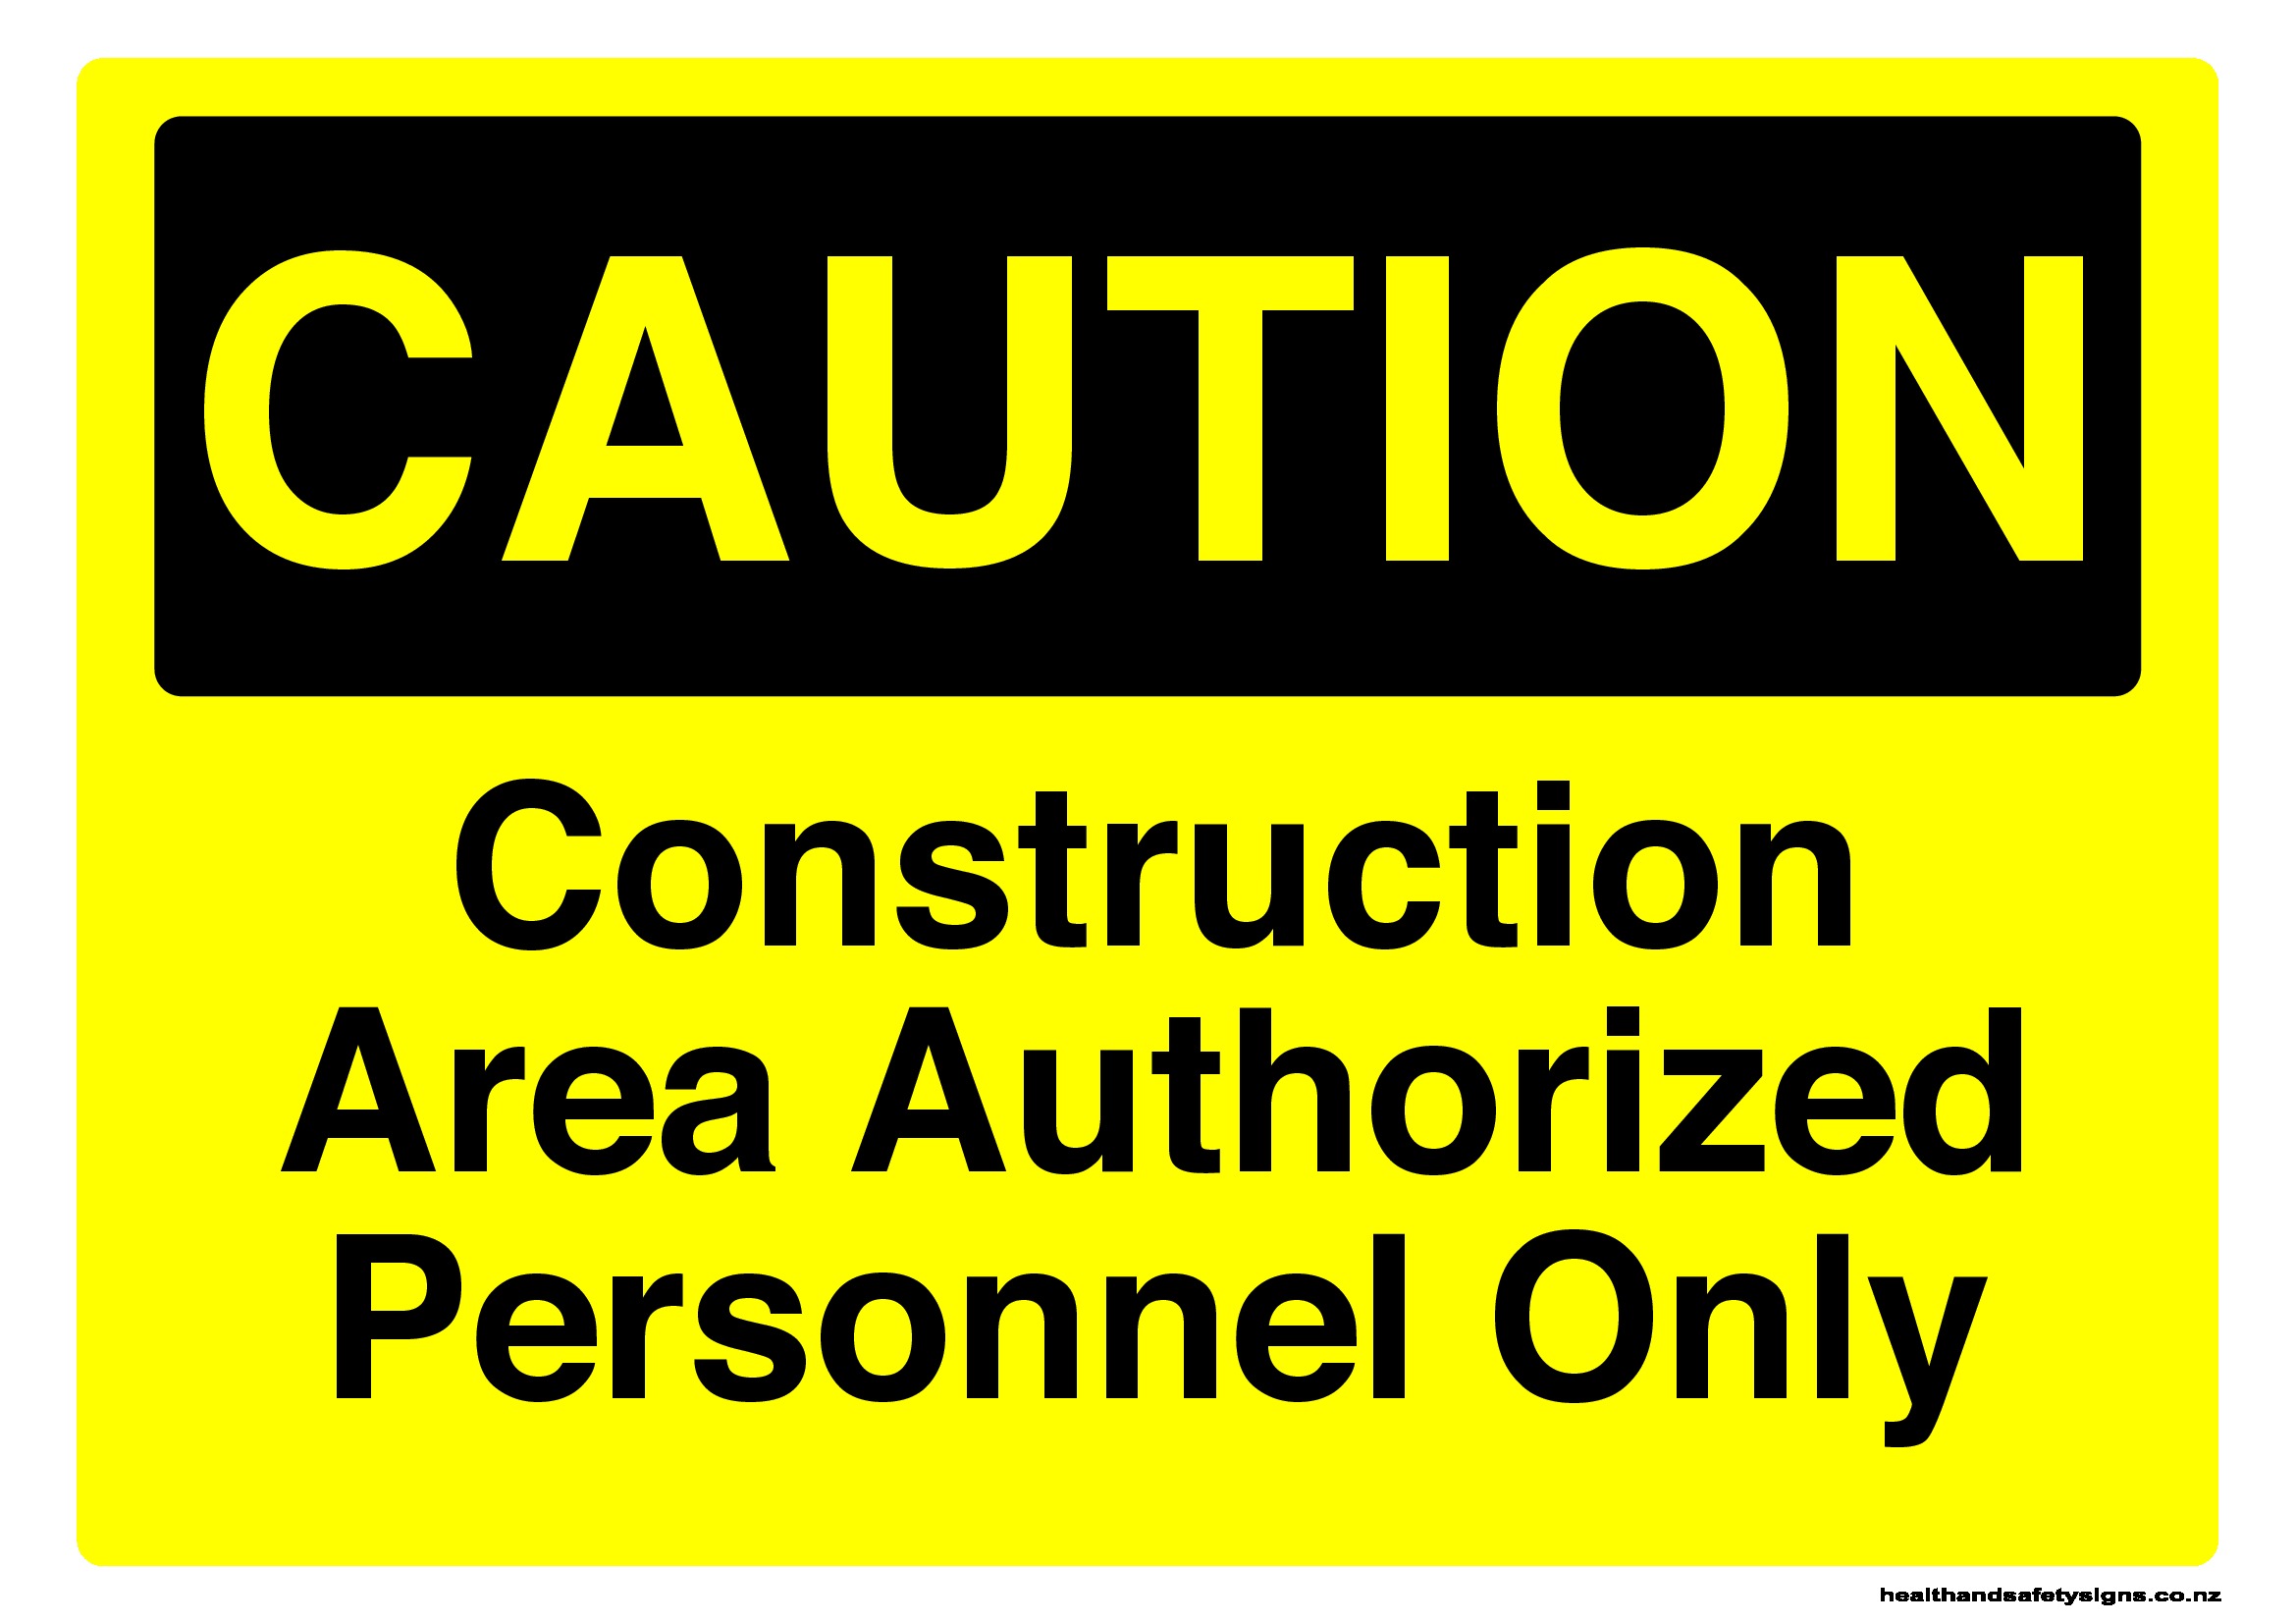 construction-area-authorized-personnel-only-caution-sign-health-and